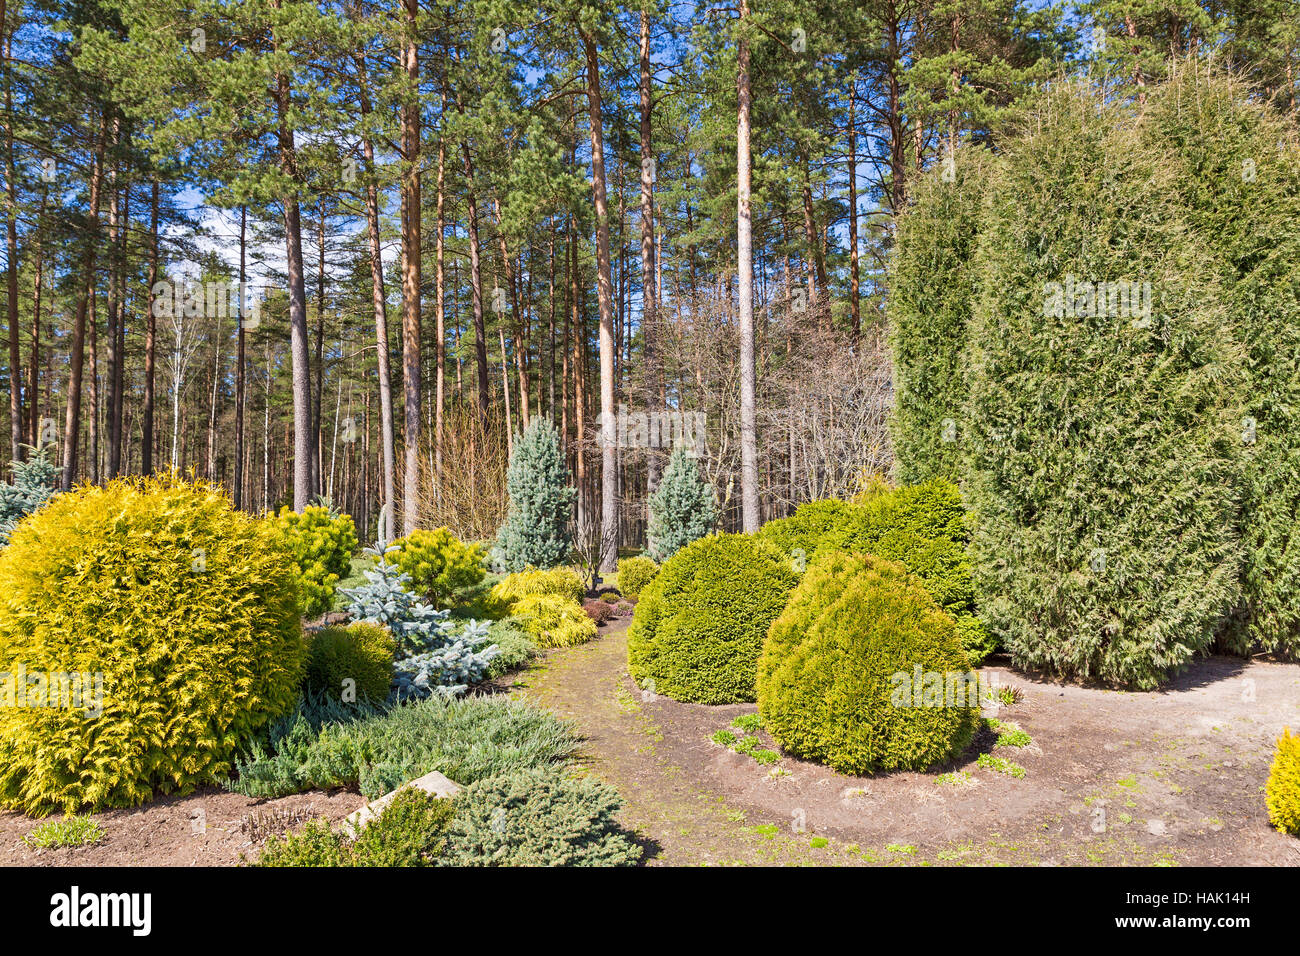 garden design with variety of conifer plants Stock Photo